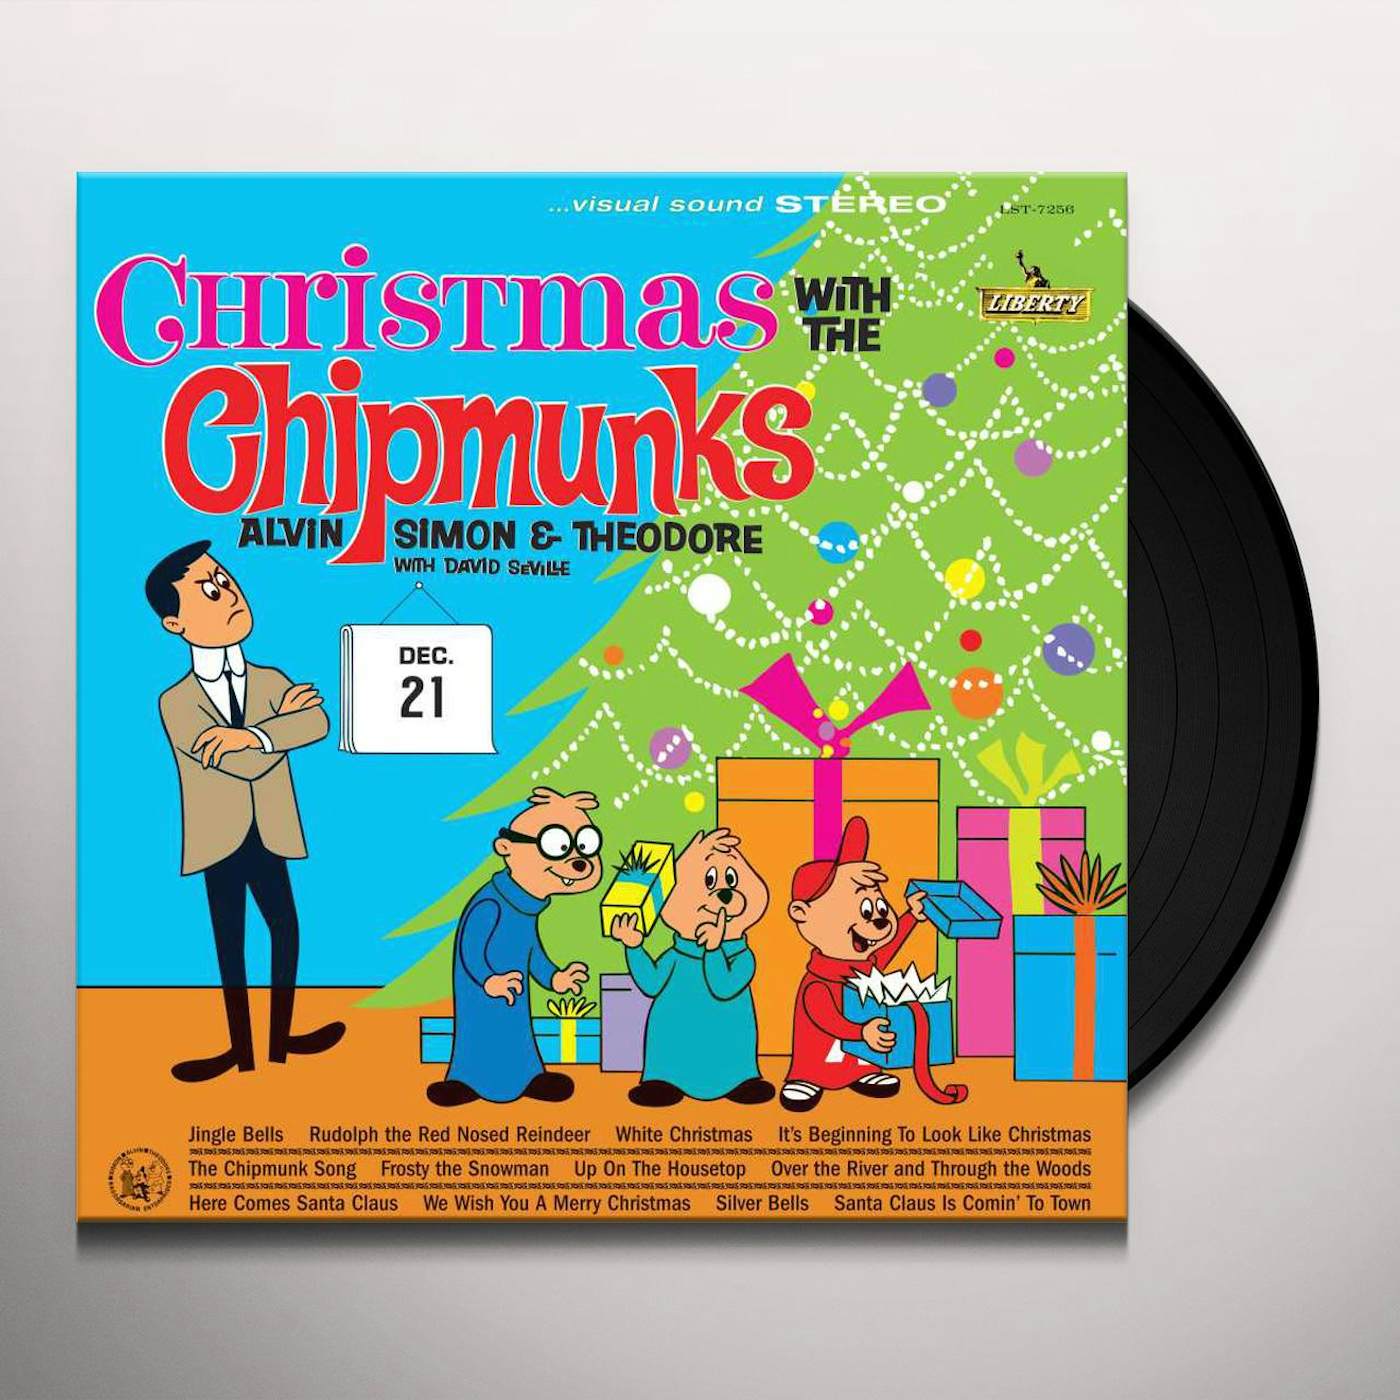 Christmas With Alvin and the Chipmunks Vinyl Record